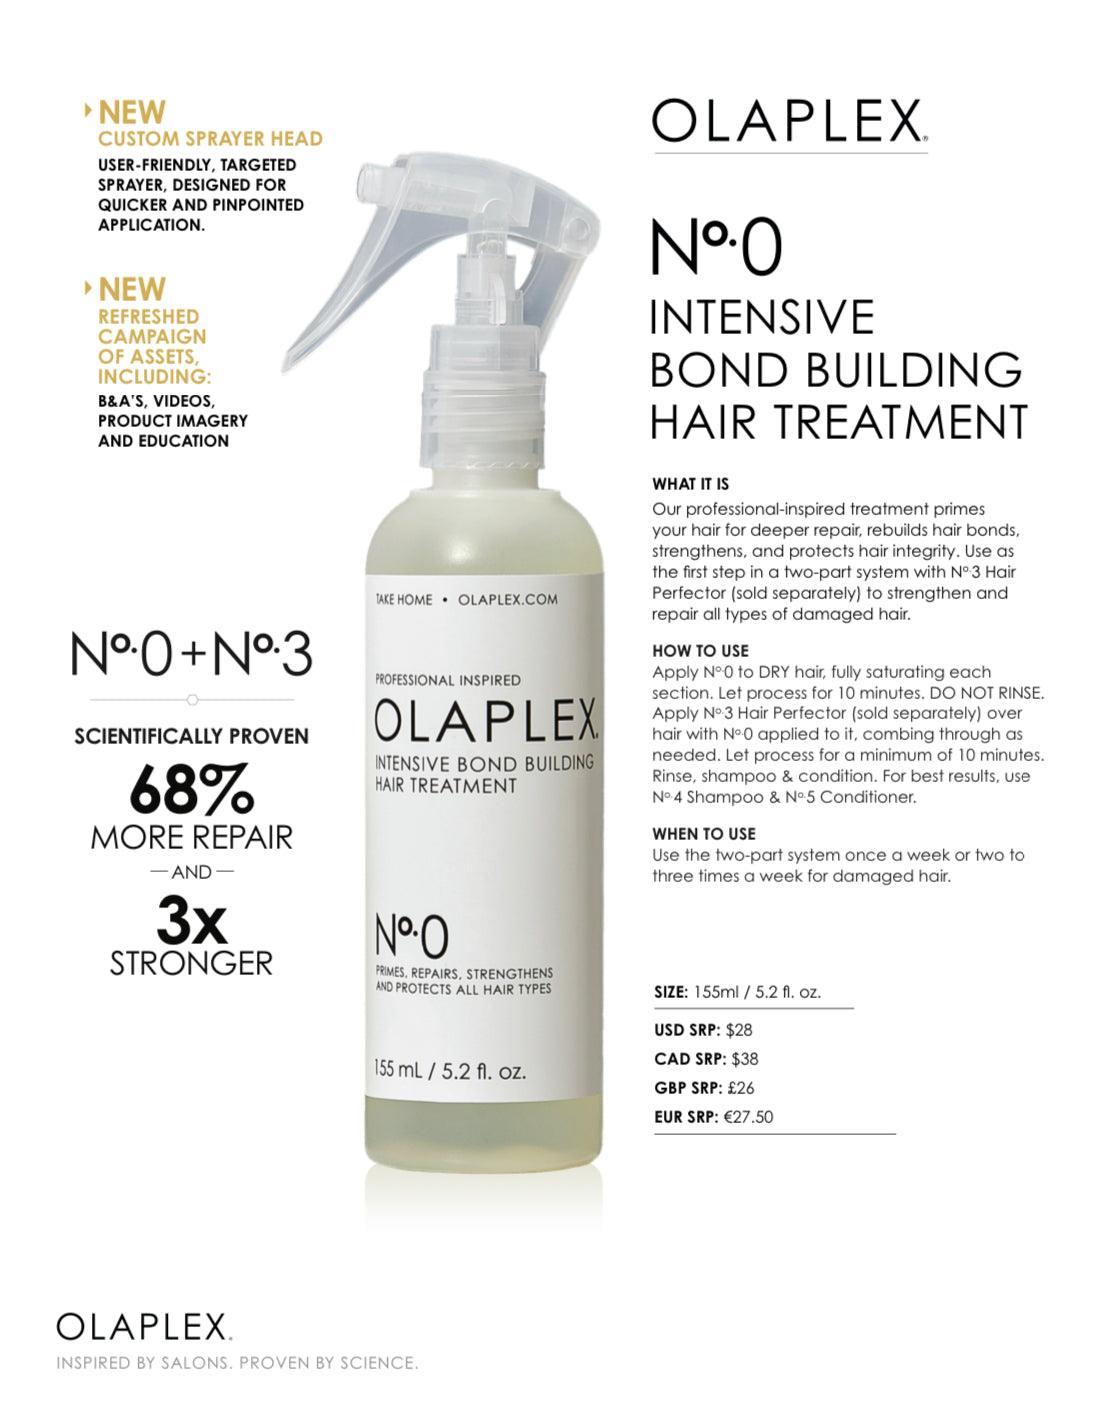 No. 0 Intensive Bond Building Hair Treatment - The Coloroom 